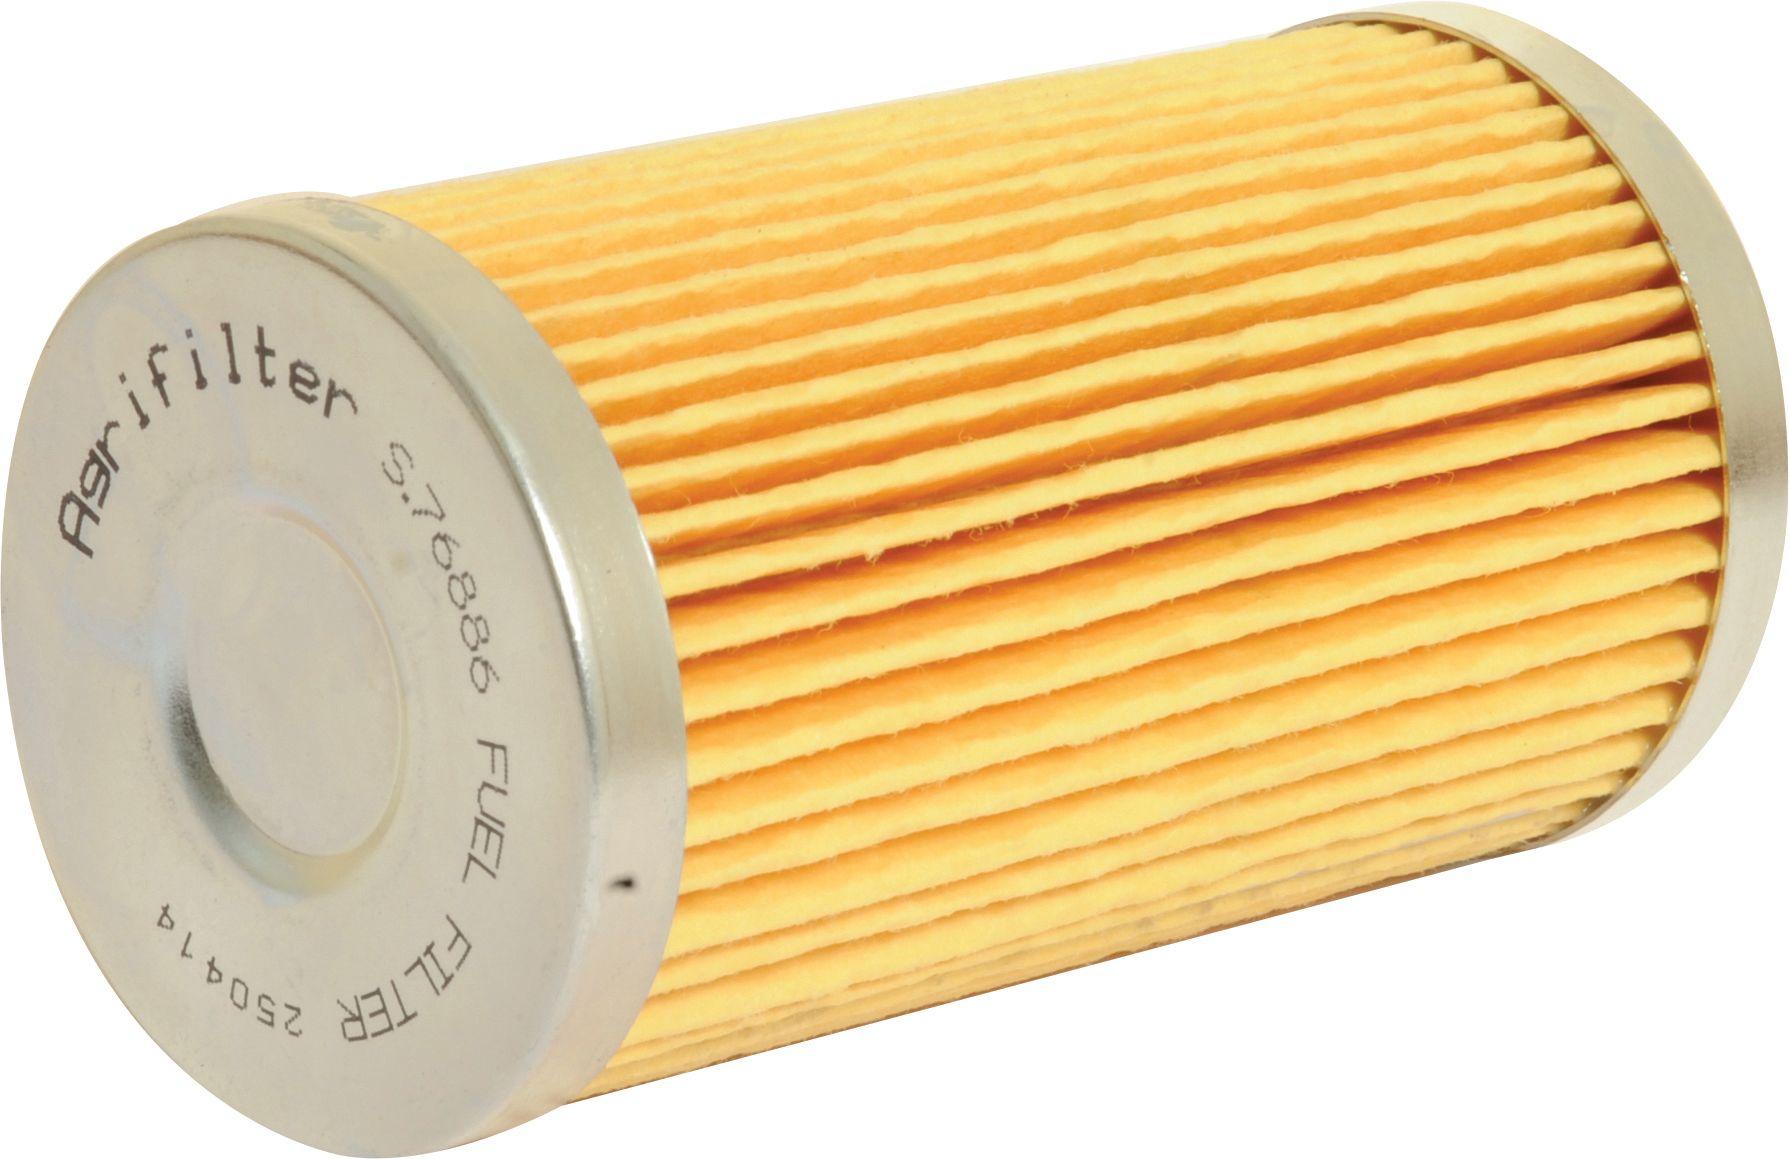 RANSOME FUEL FILTER 76886